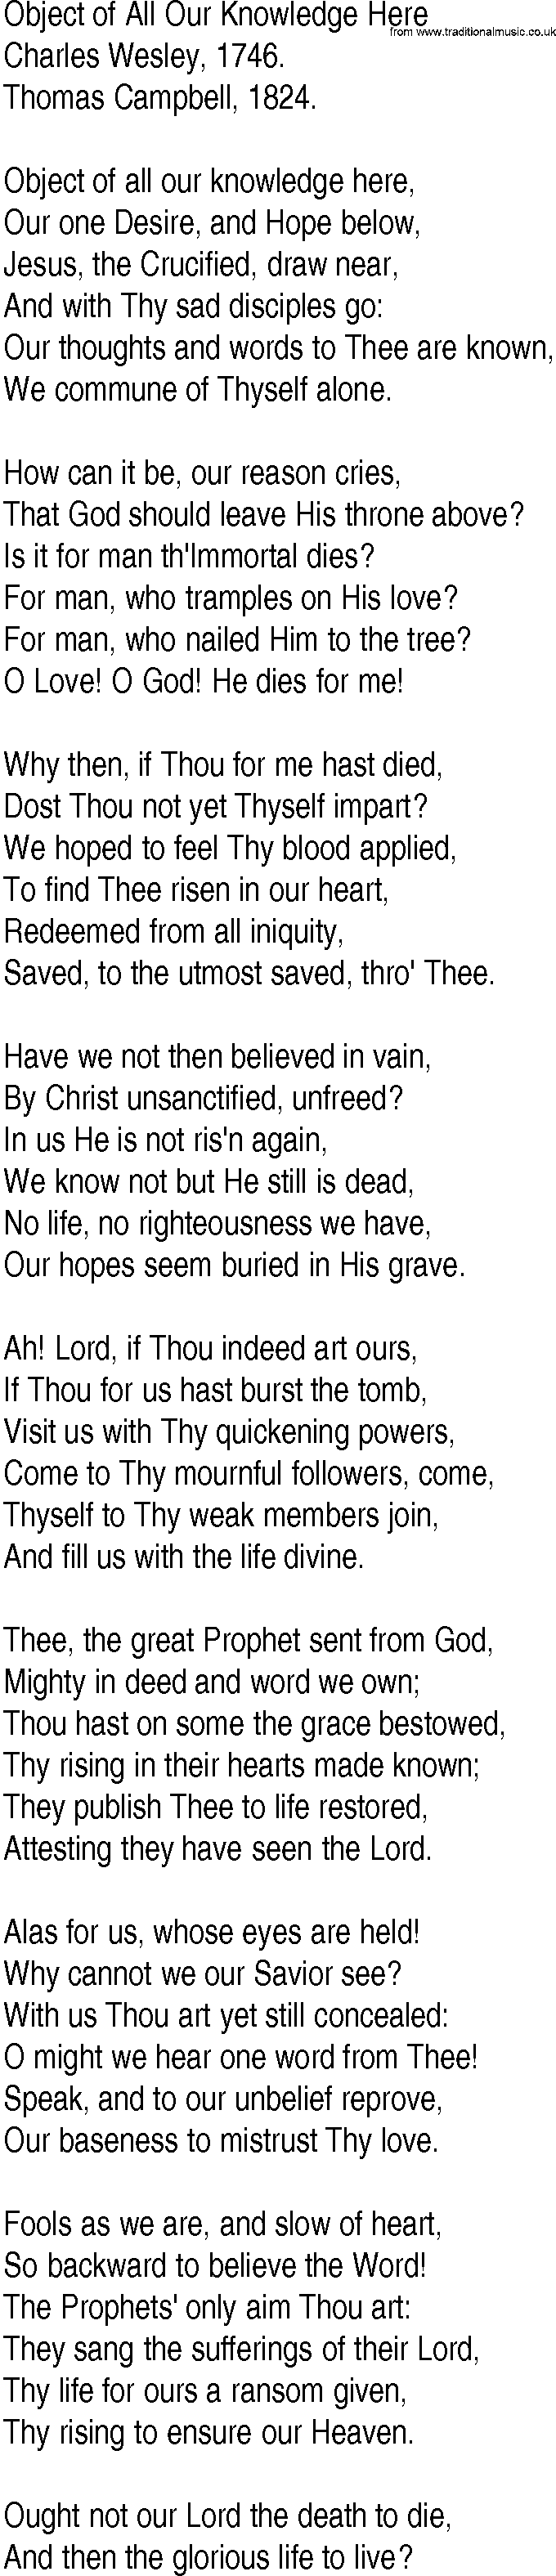 Hymn and Gospel Song: Object of All Our Knowledge Here by Charles Wesley lyrics